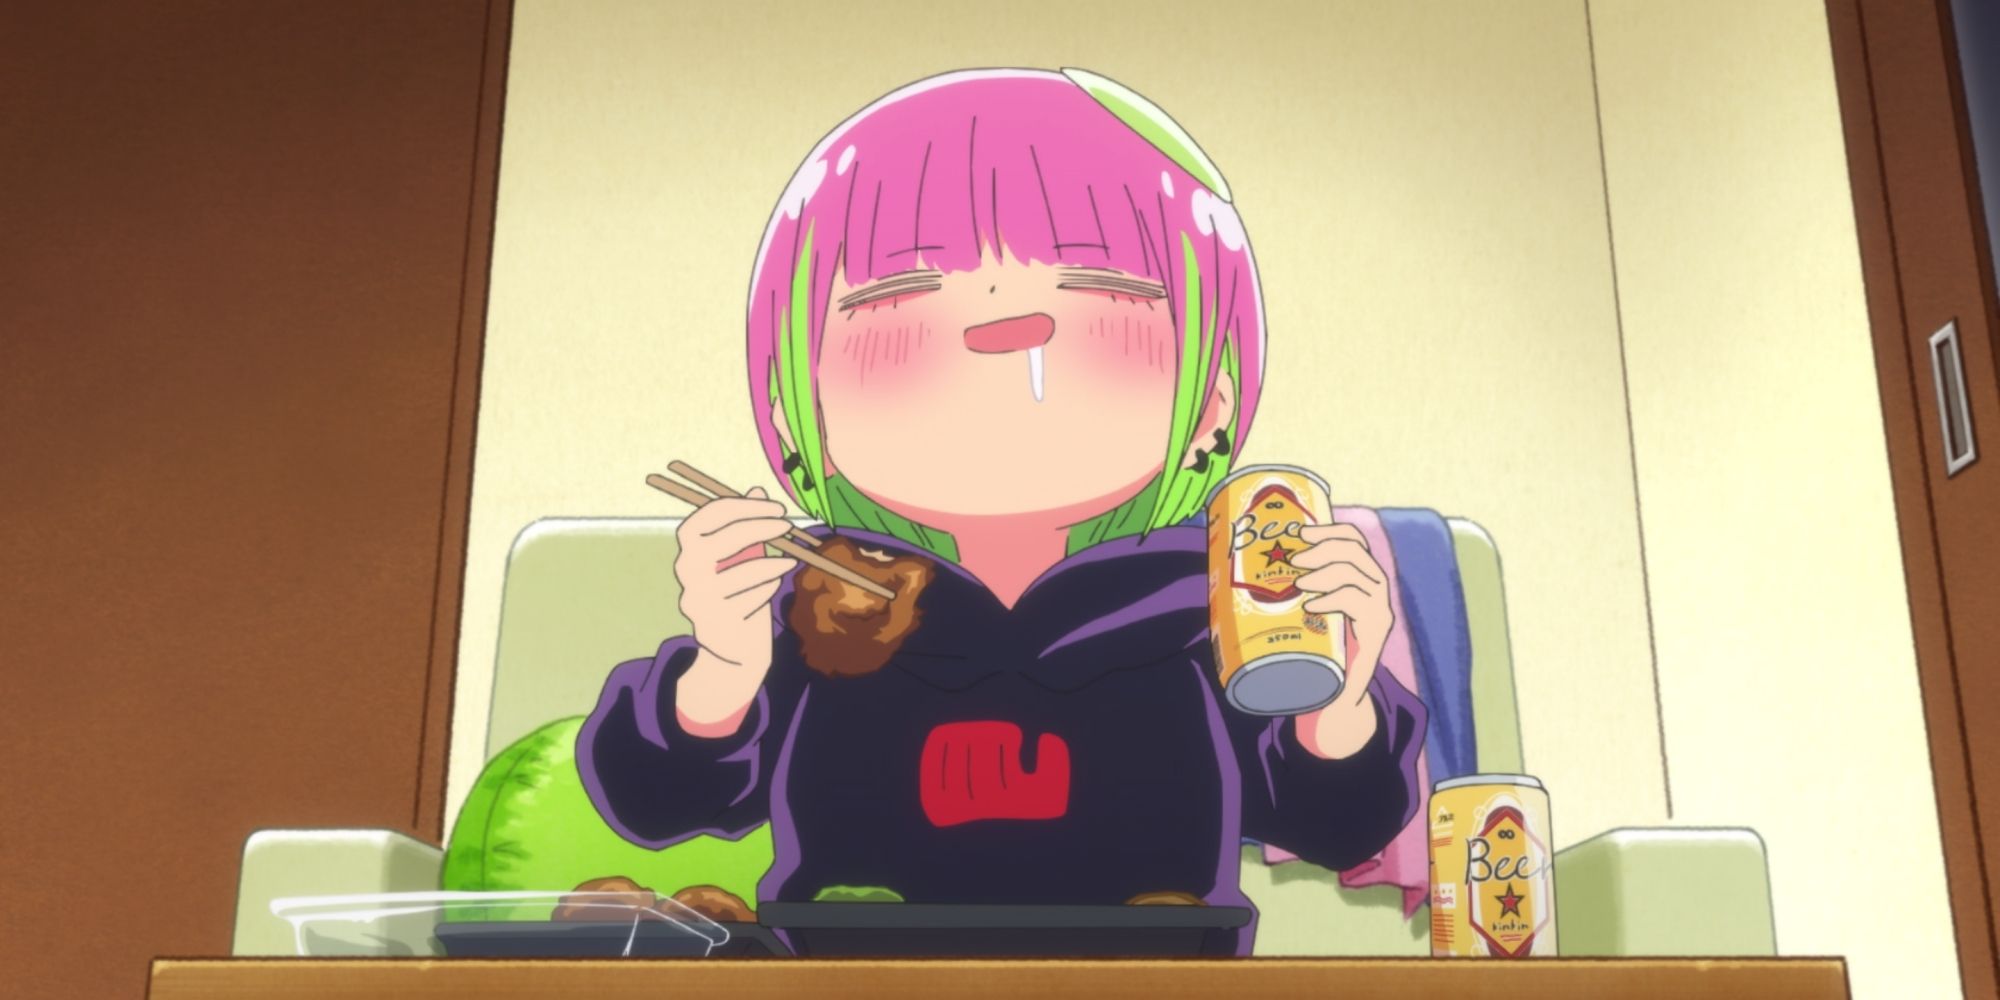 Kawashiri smiles with fried chicken in one hand and beer in the other in I'm Kodama Kawashiri.